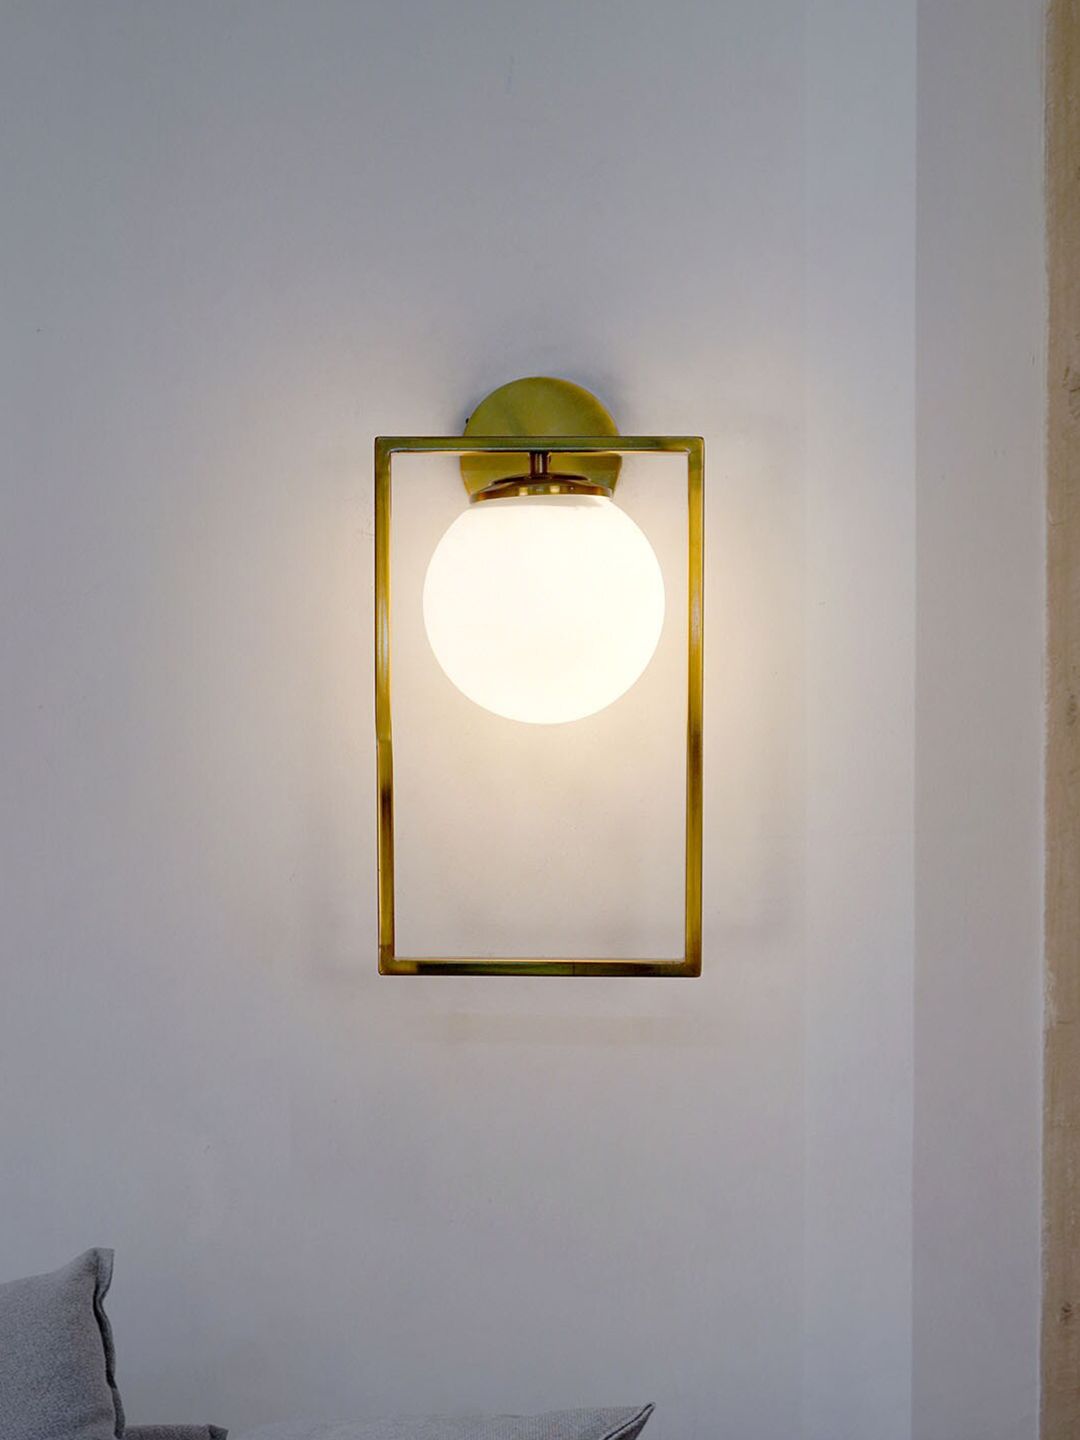 Fos Lighting Gold-Toned & White Classic Country Wall Lamp Price in India